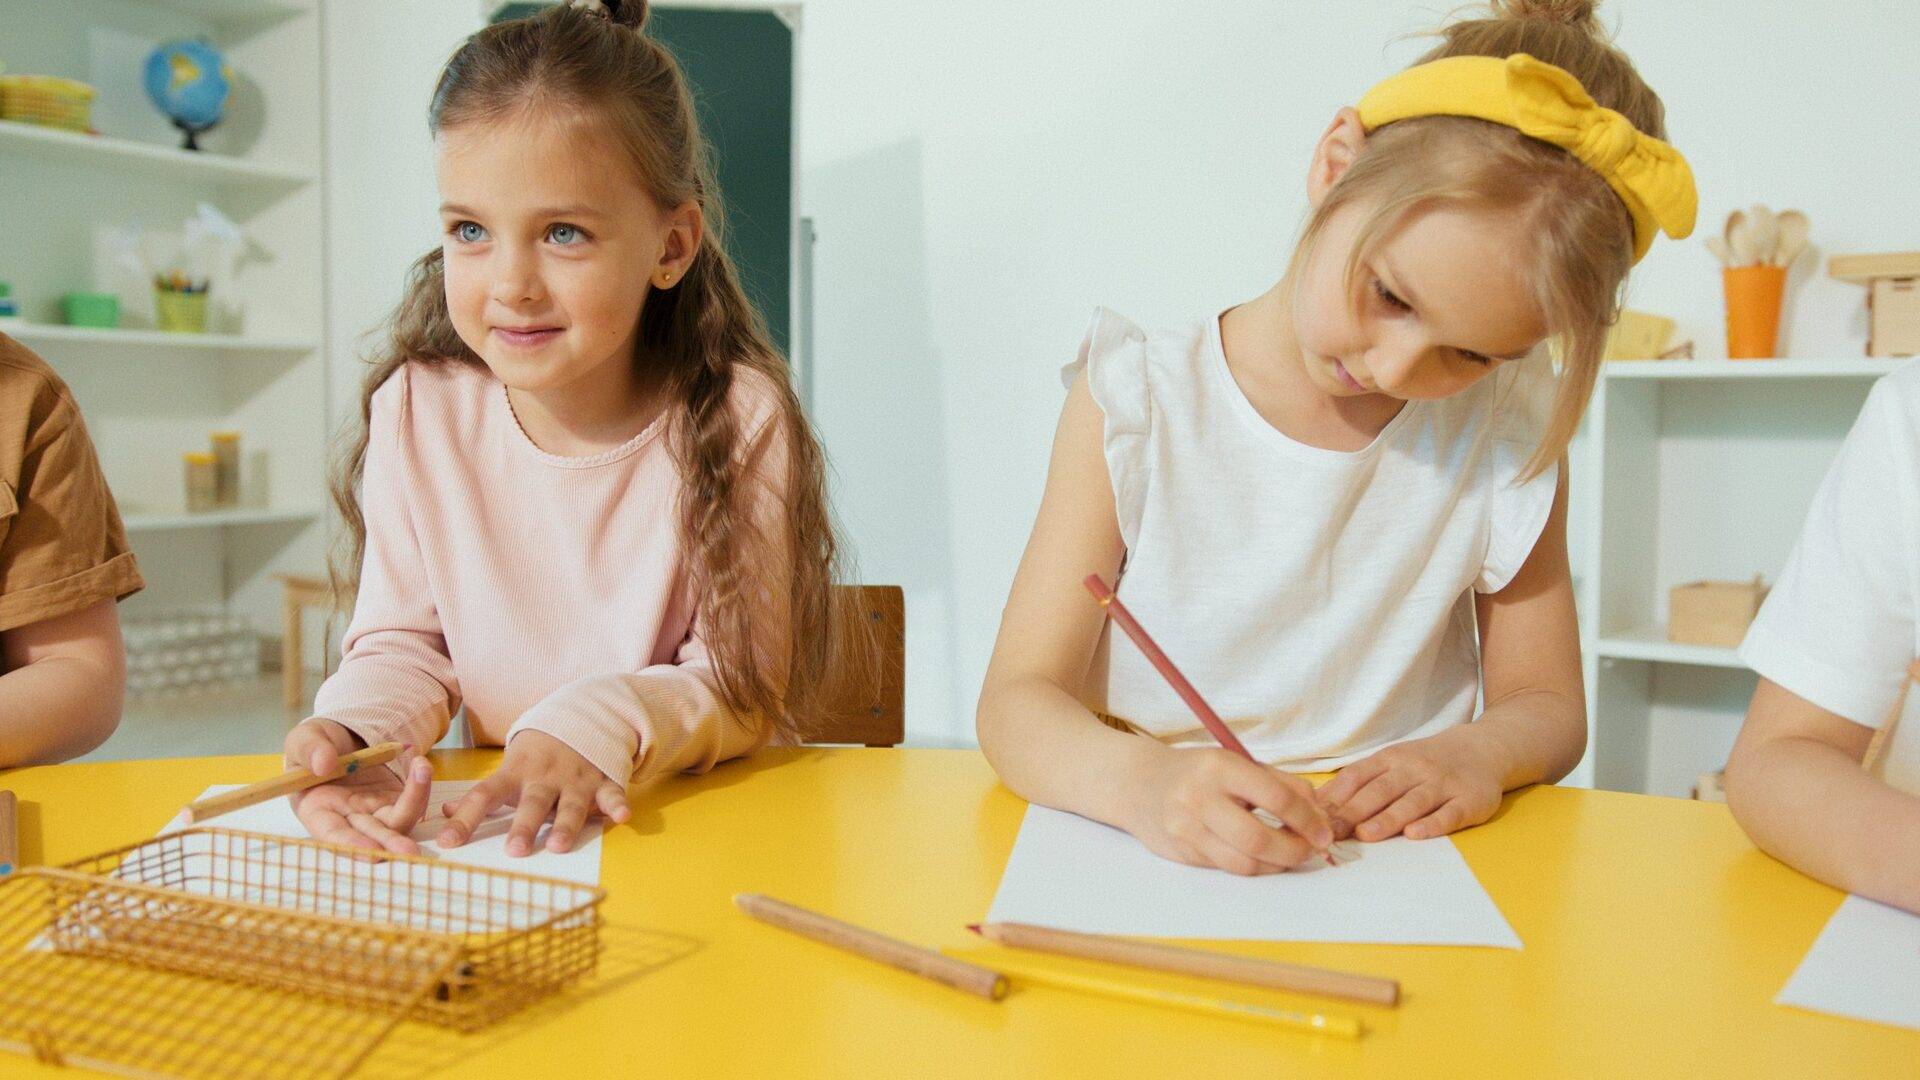 Two students writing